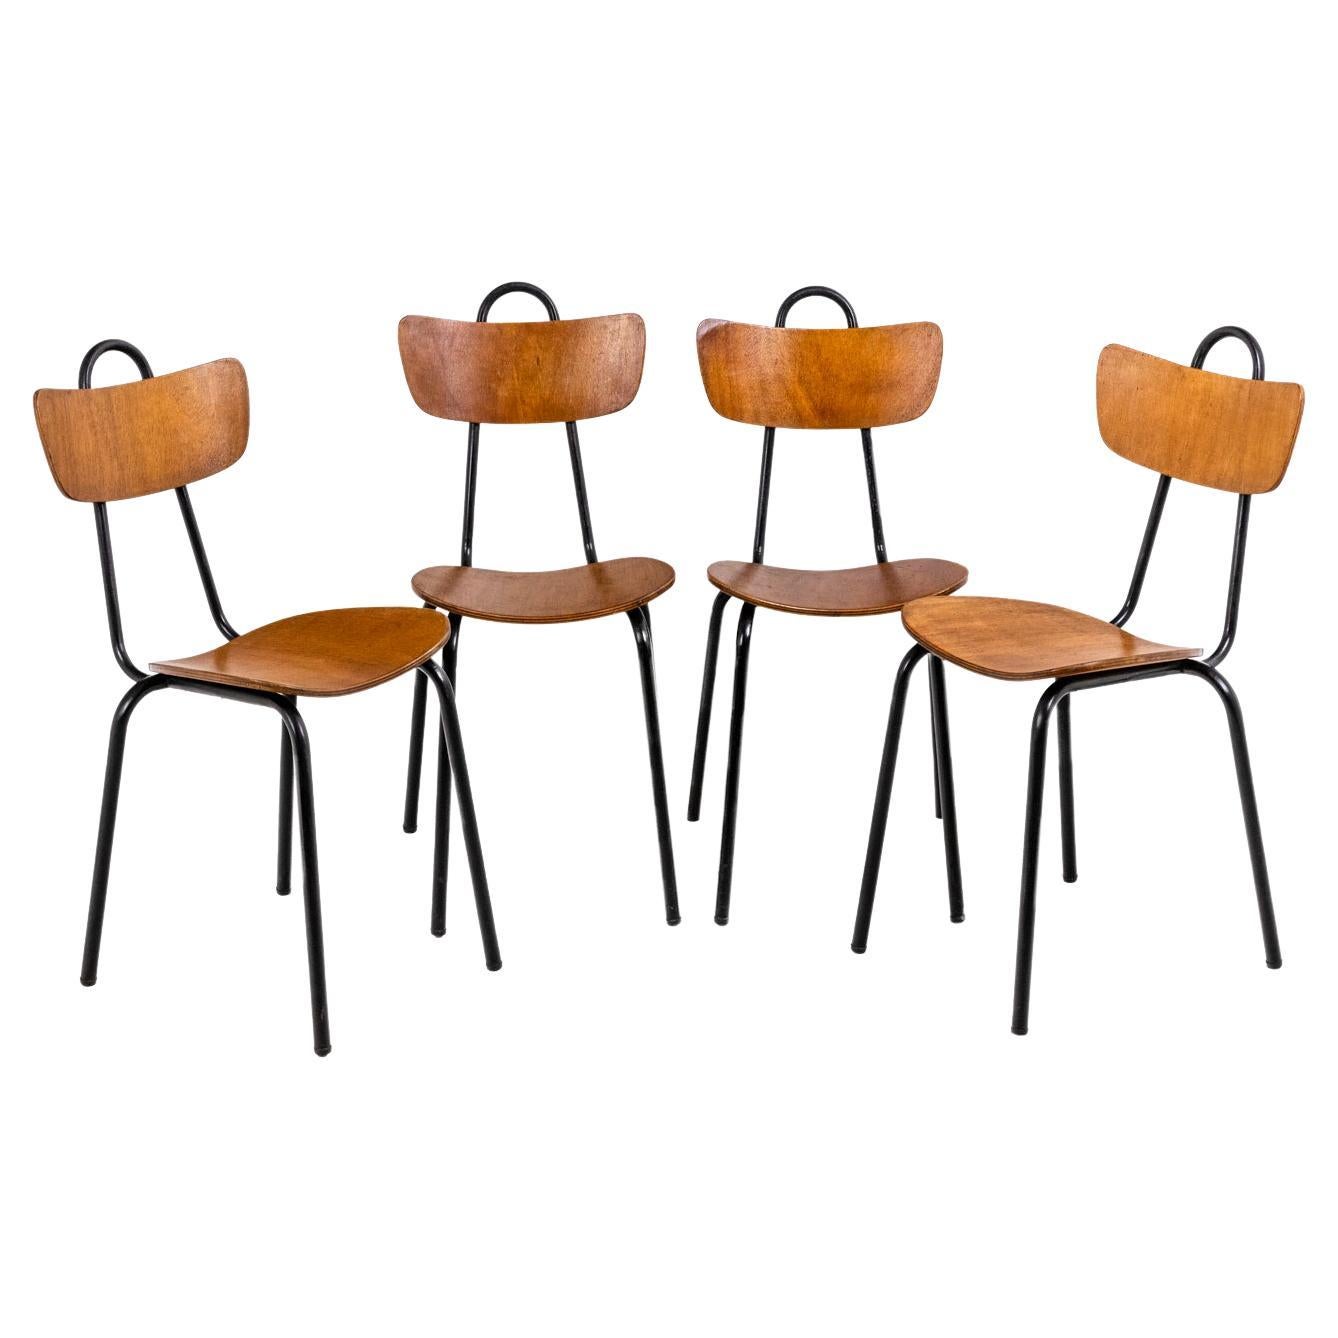 Series of Four Chairs in Wood and Metal, 1950s For Sale